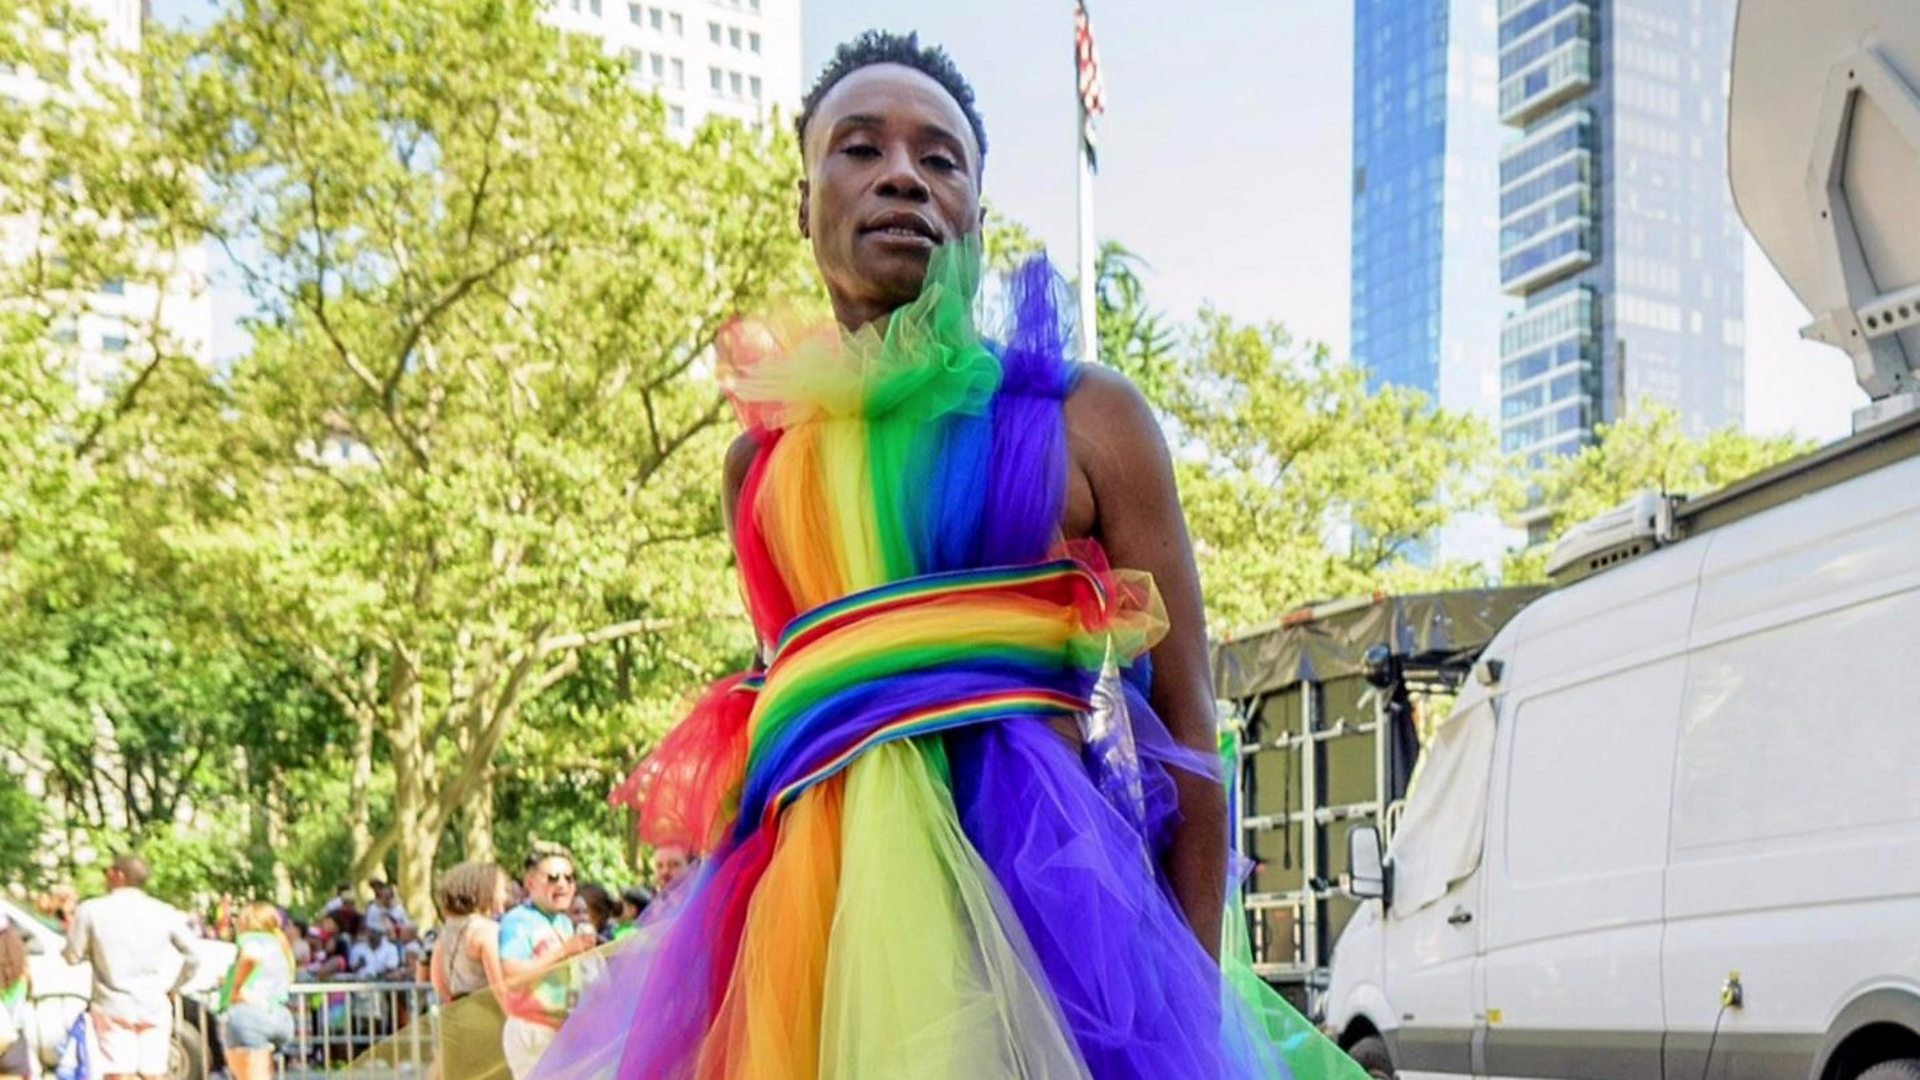 London Pride 2019: Billy Porter on being a 'piece of political art' - BBC  News